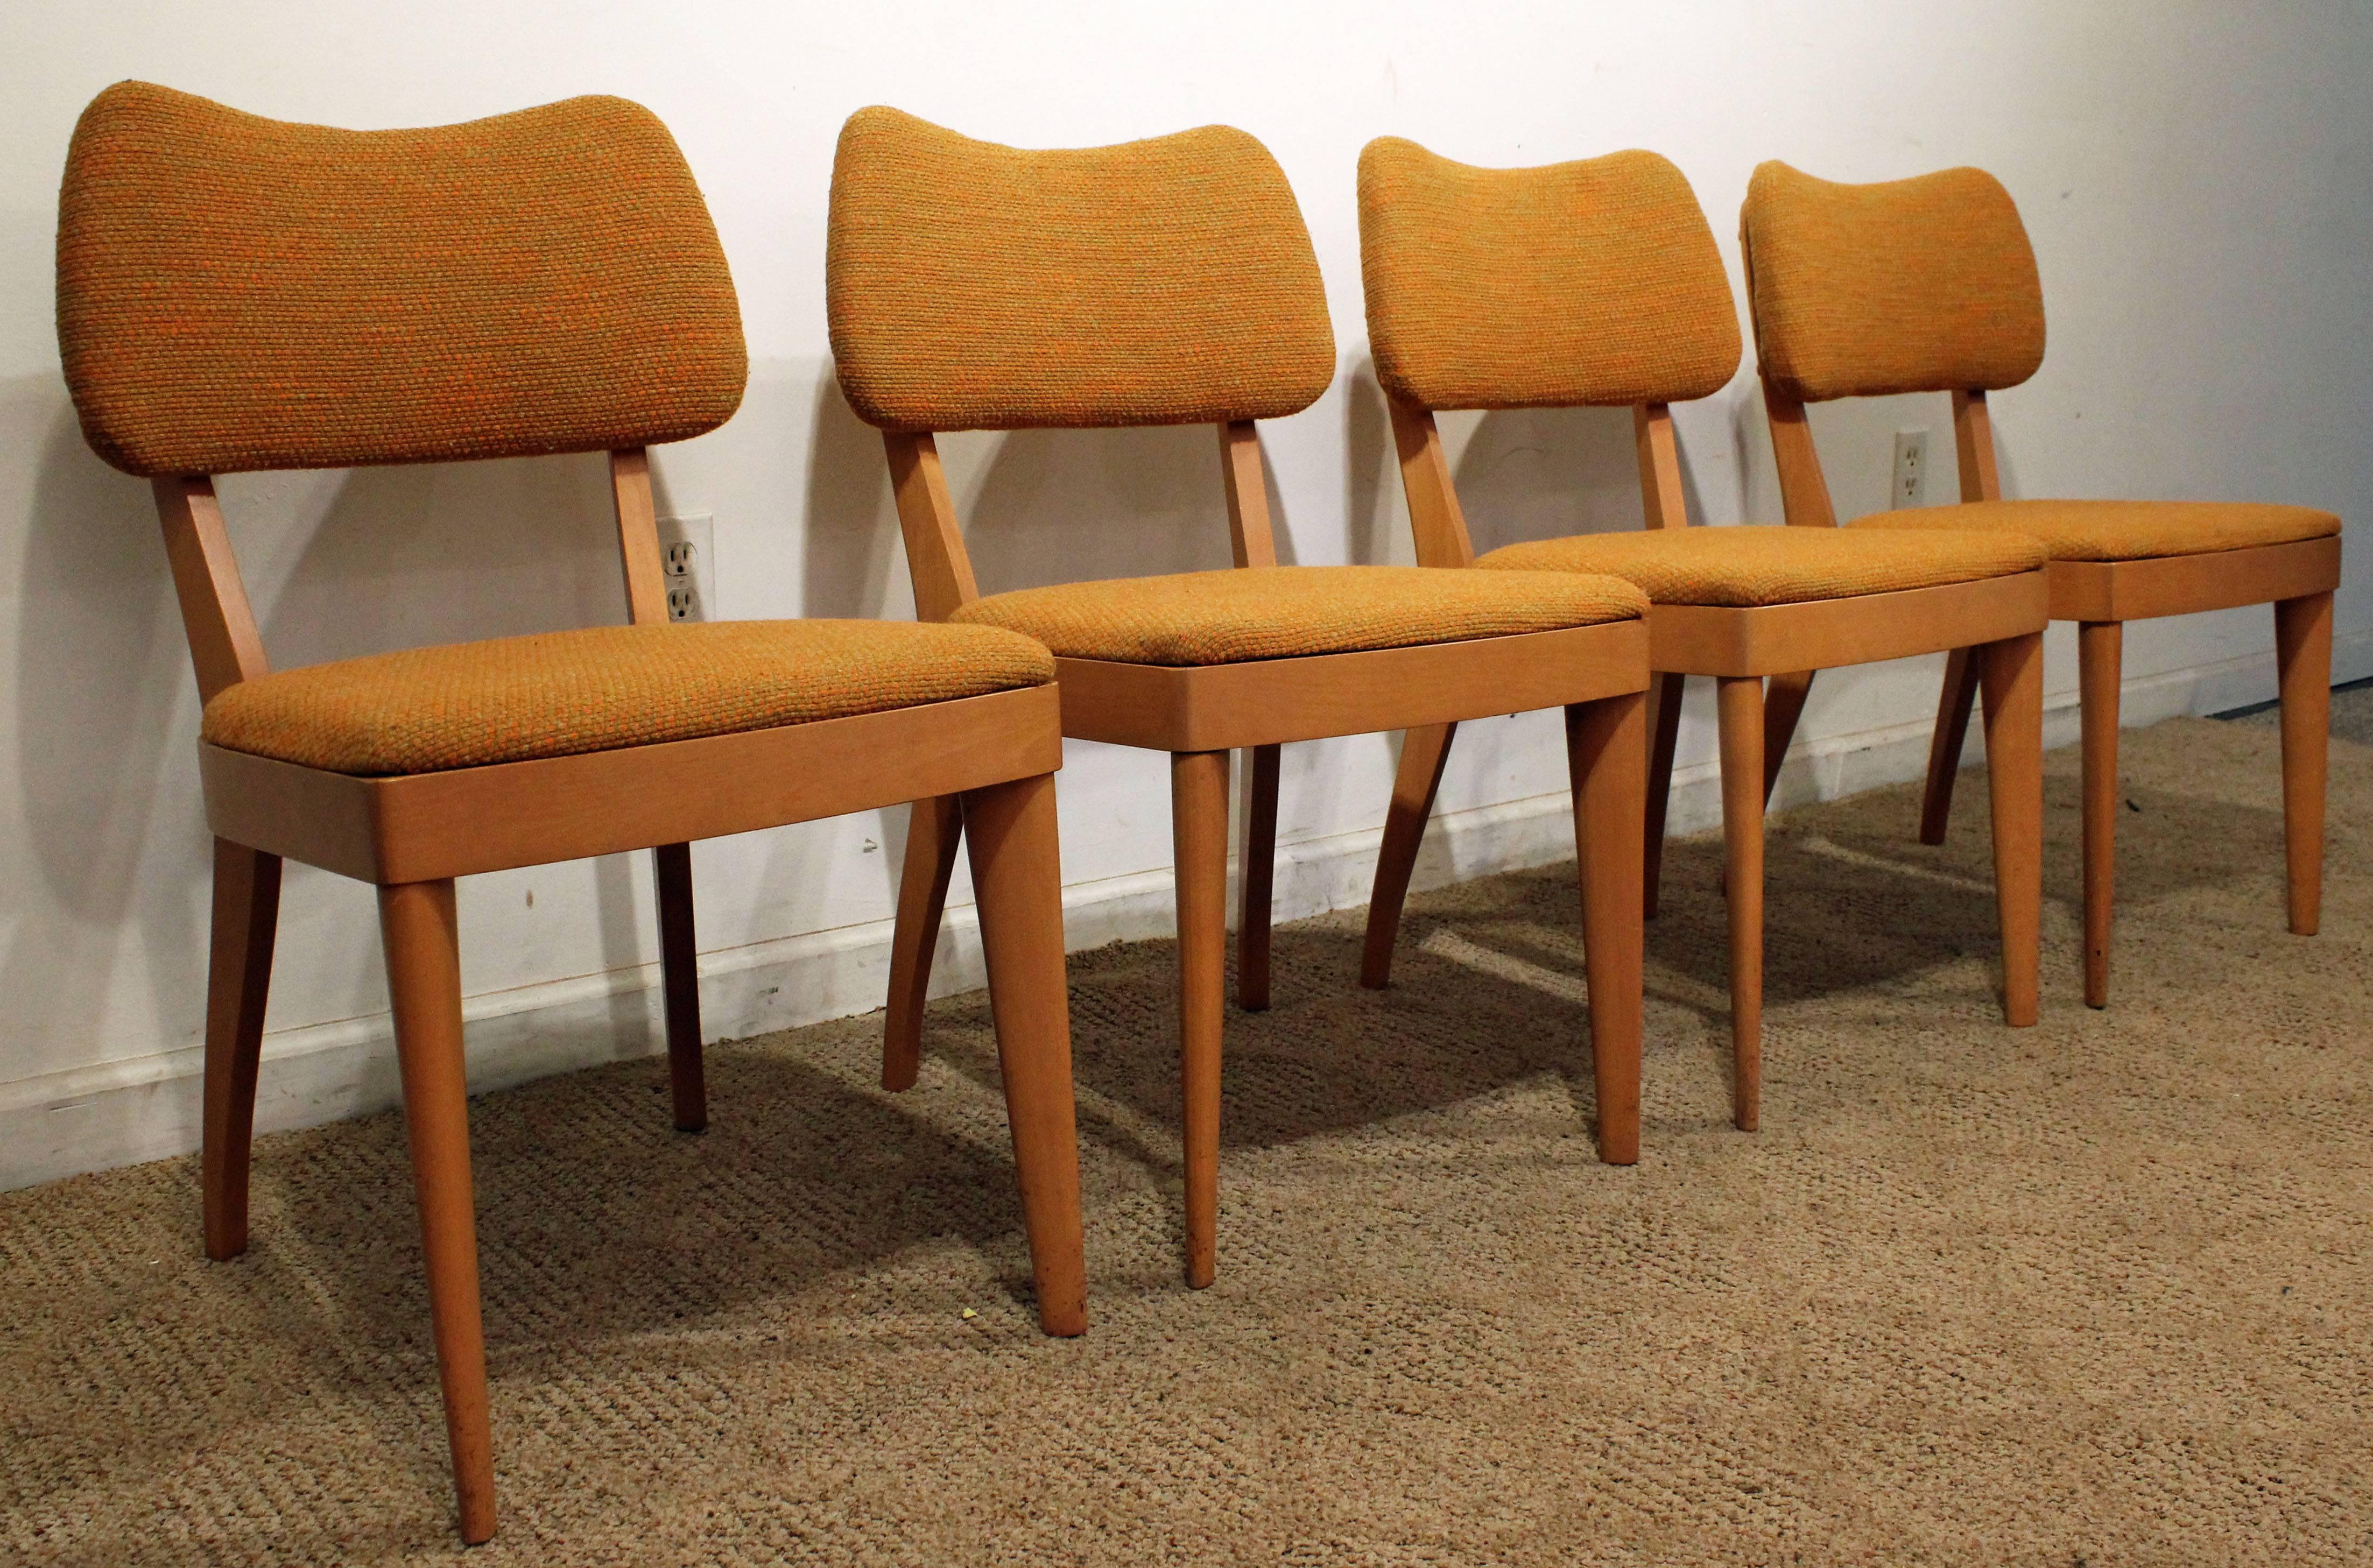 Offered is a set of 4 dining chairs, made by Heywood Wakefield. This set includes four side chairs made of birch with a champagne finish. In good condition and signed.

Approximate dimensions:
19.5